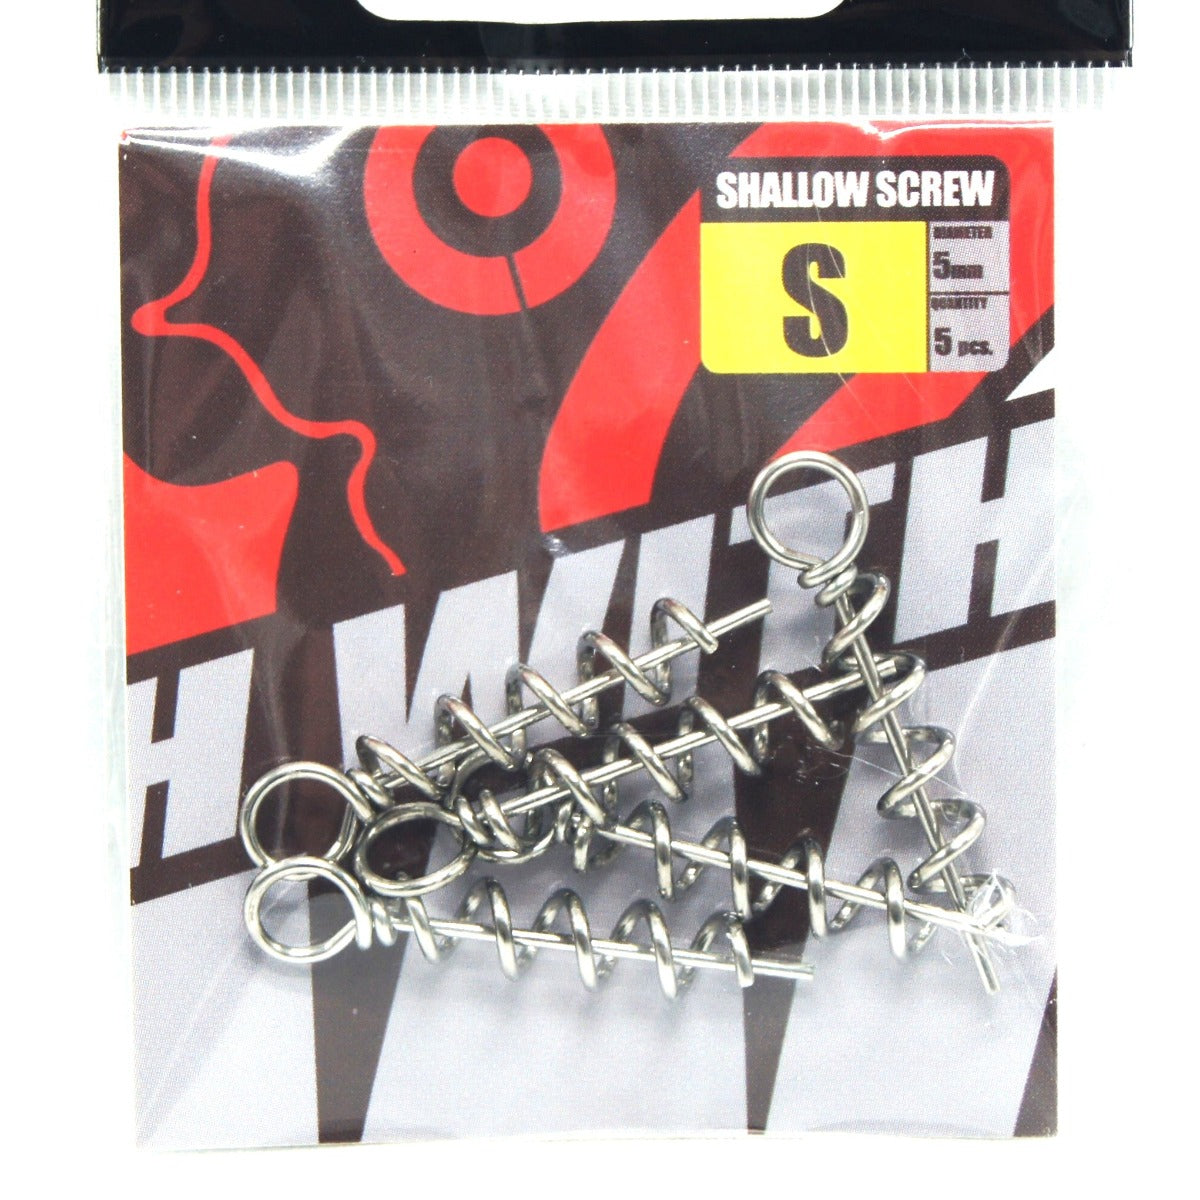 CWC Small Shallow Screw (5-pack)